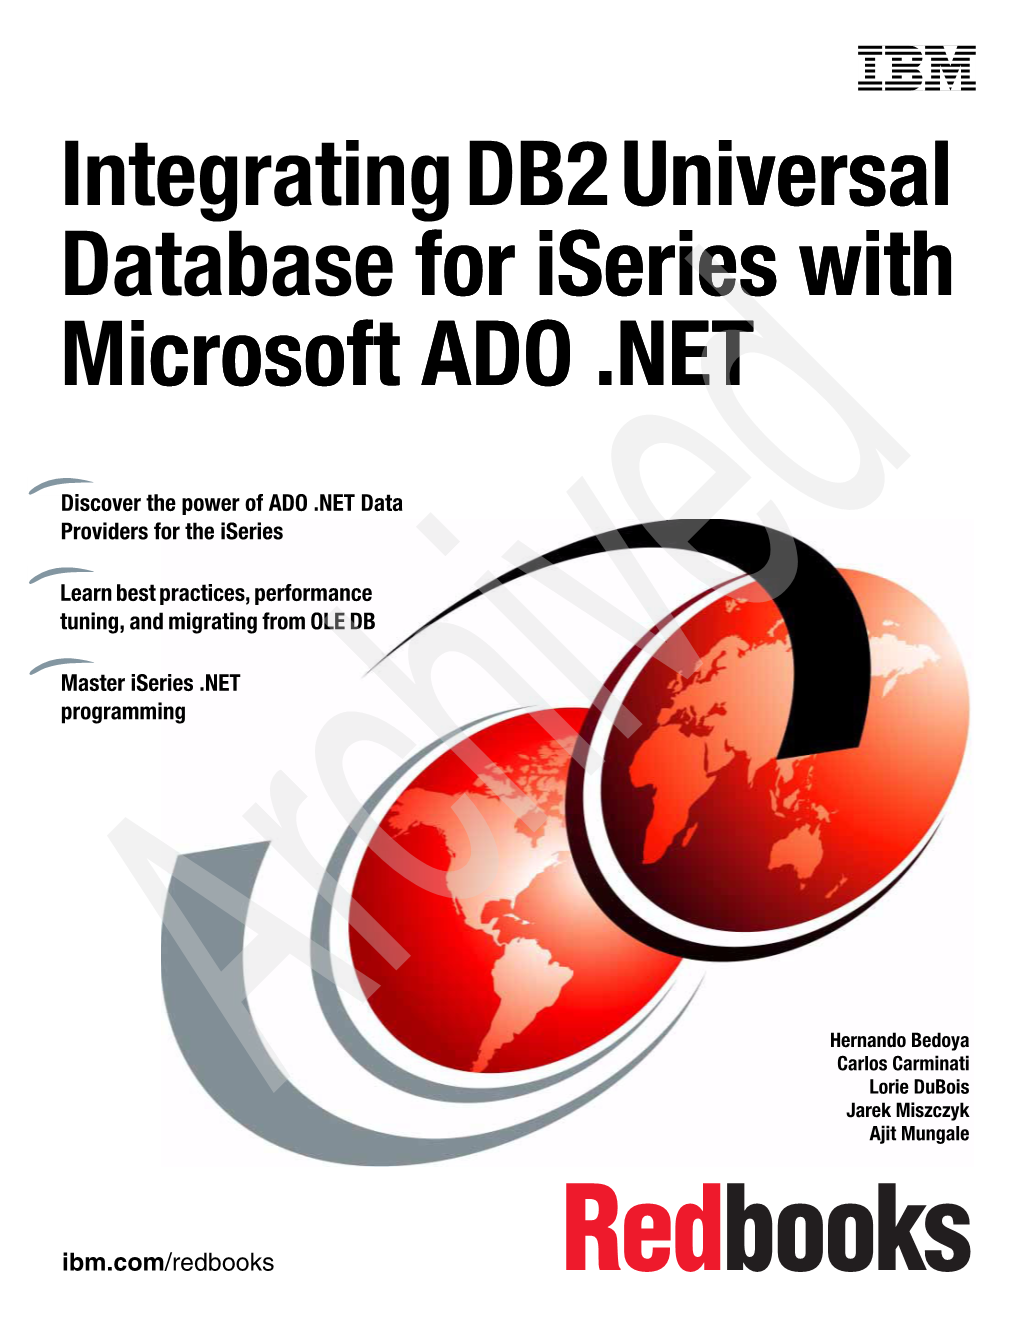 Integrating DB2 Universal Database for Iseries with Microsoft ADO .NET April 2005